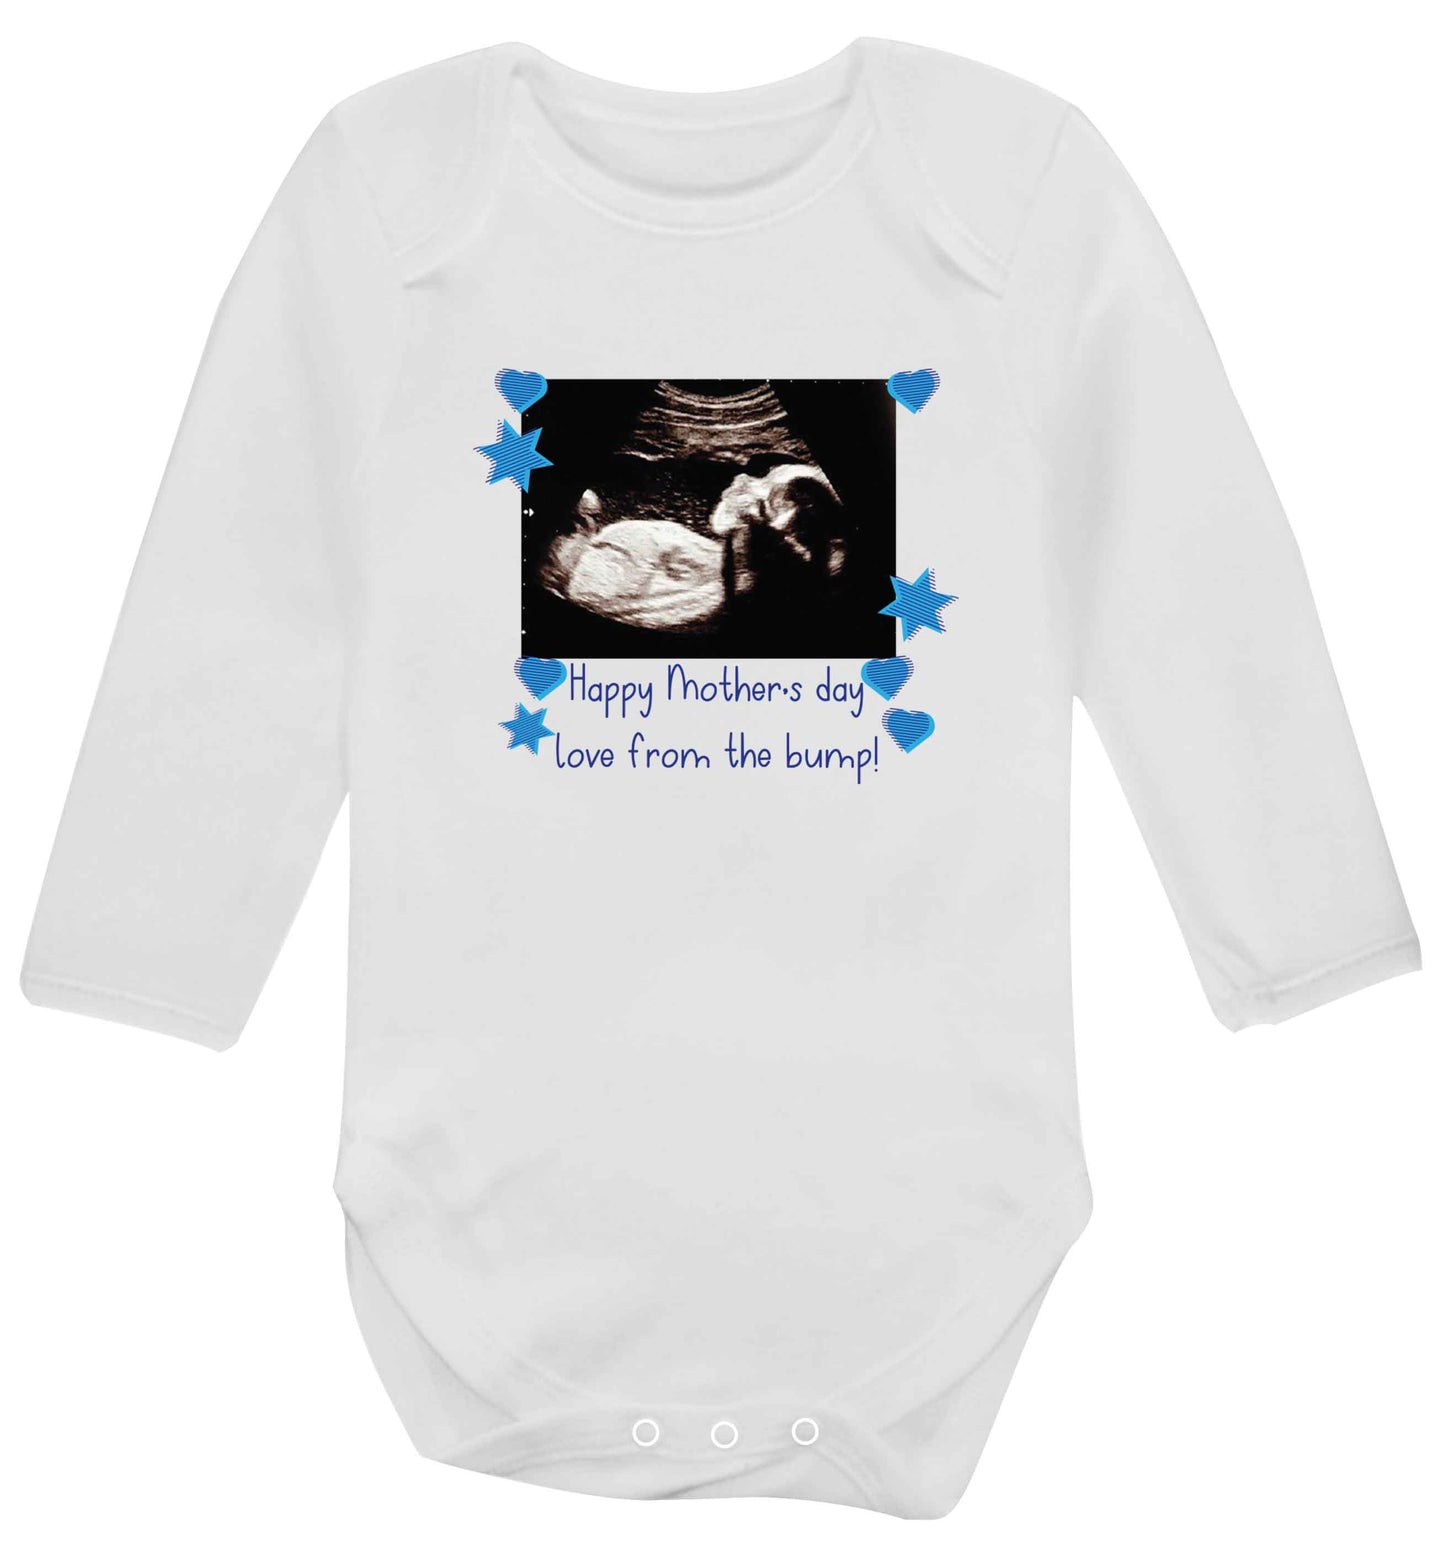 Happy Mother's day love from the bump - blue baby vest long sleeved white 6-12 months